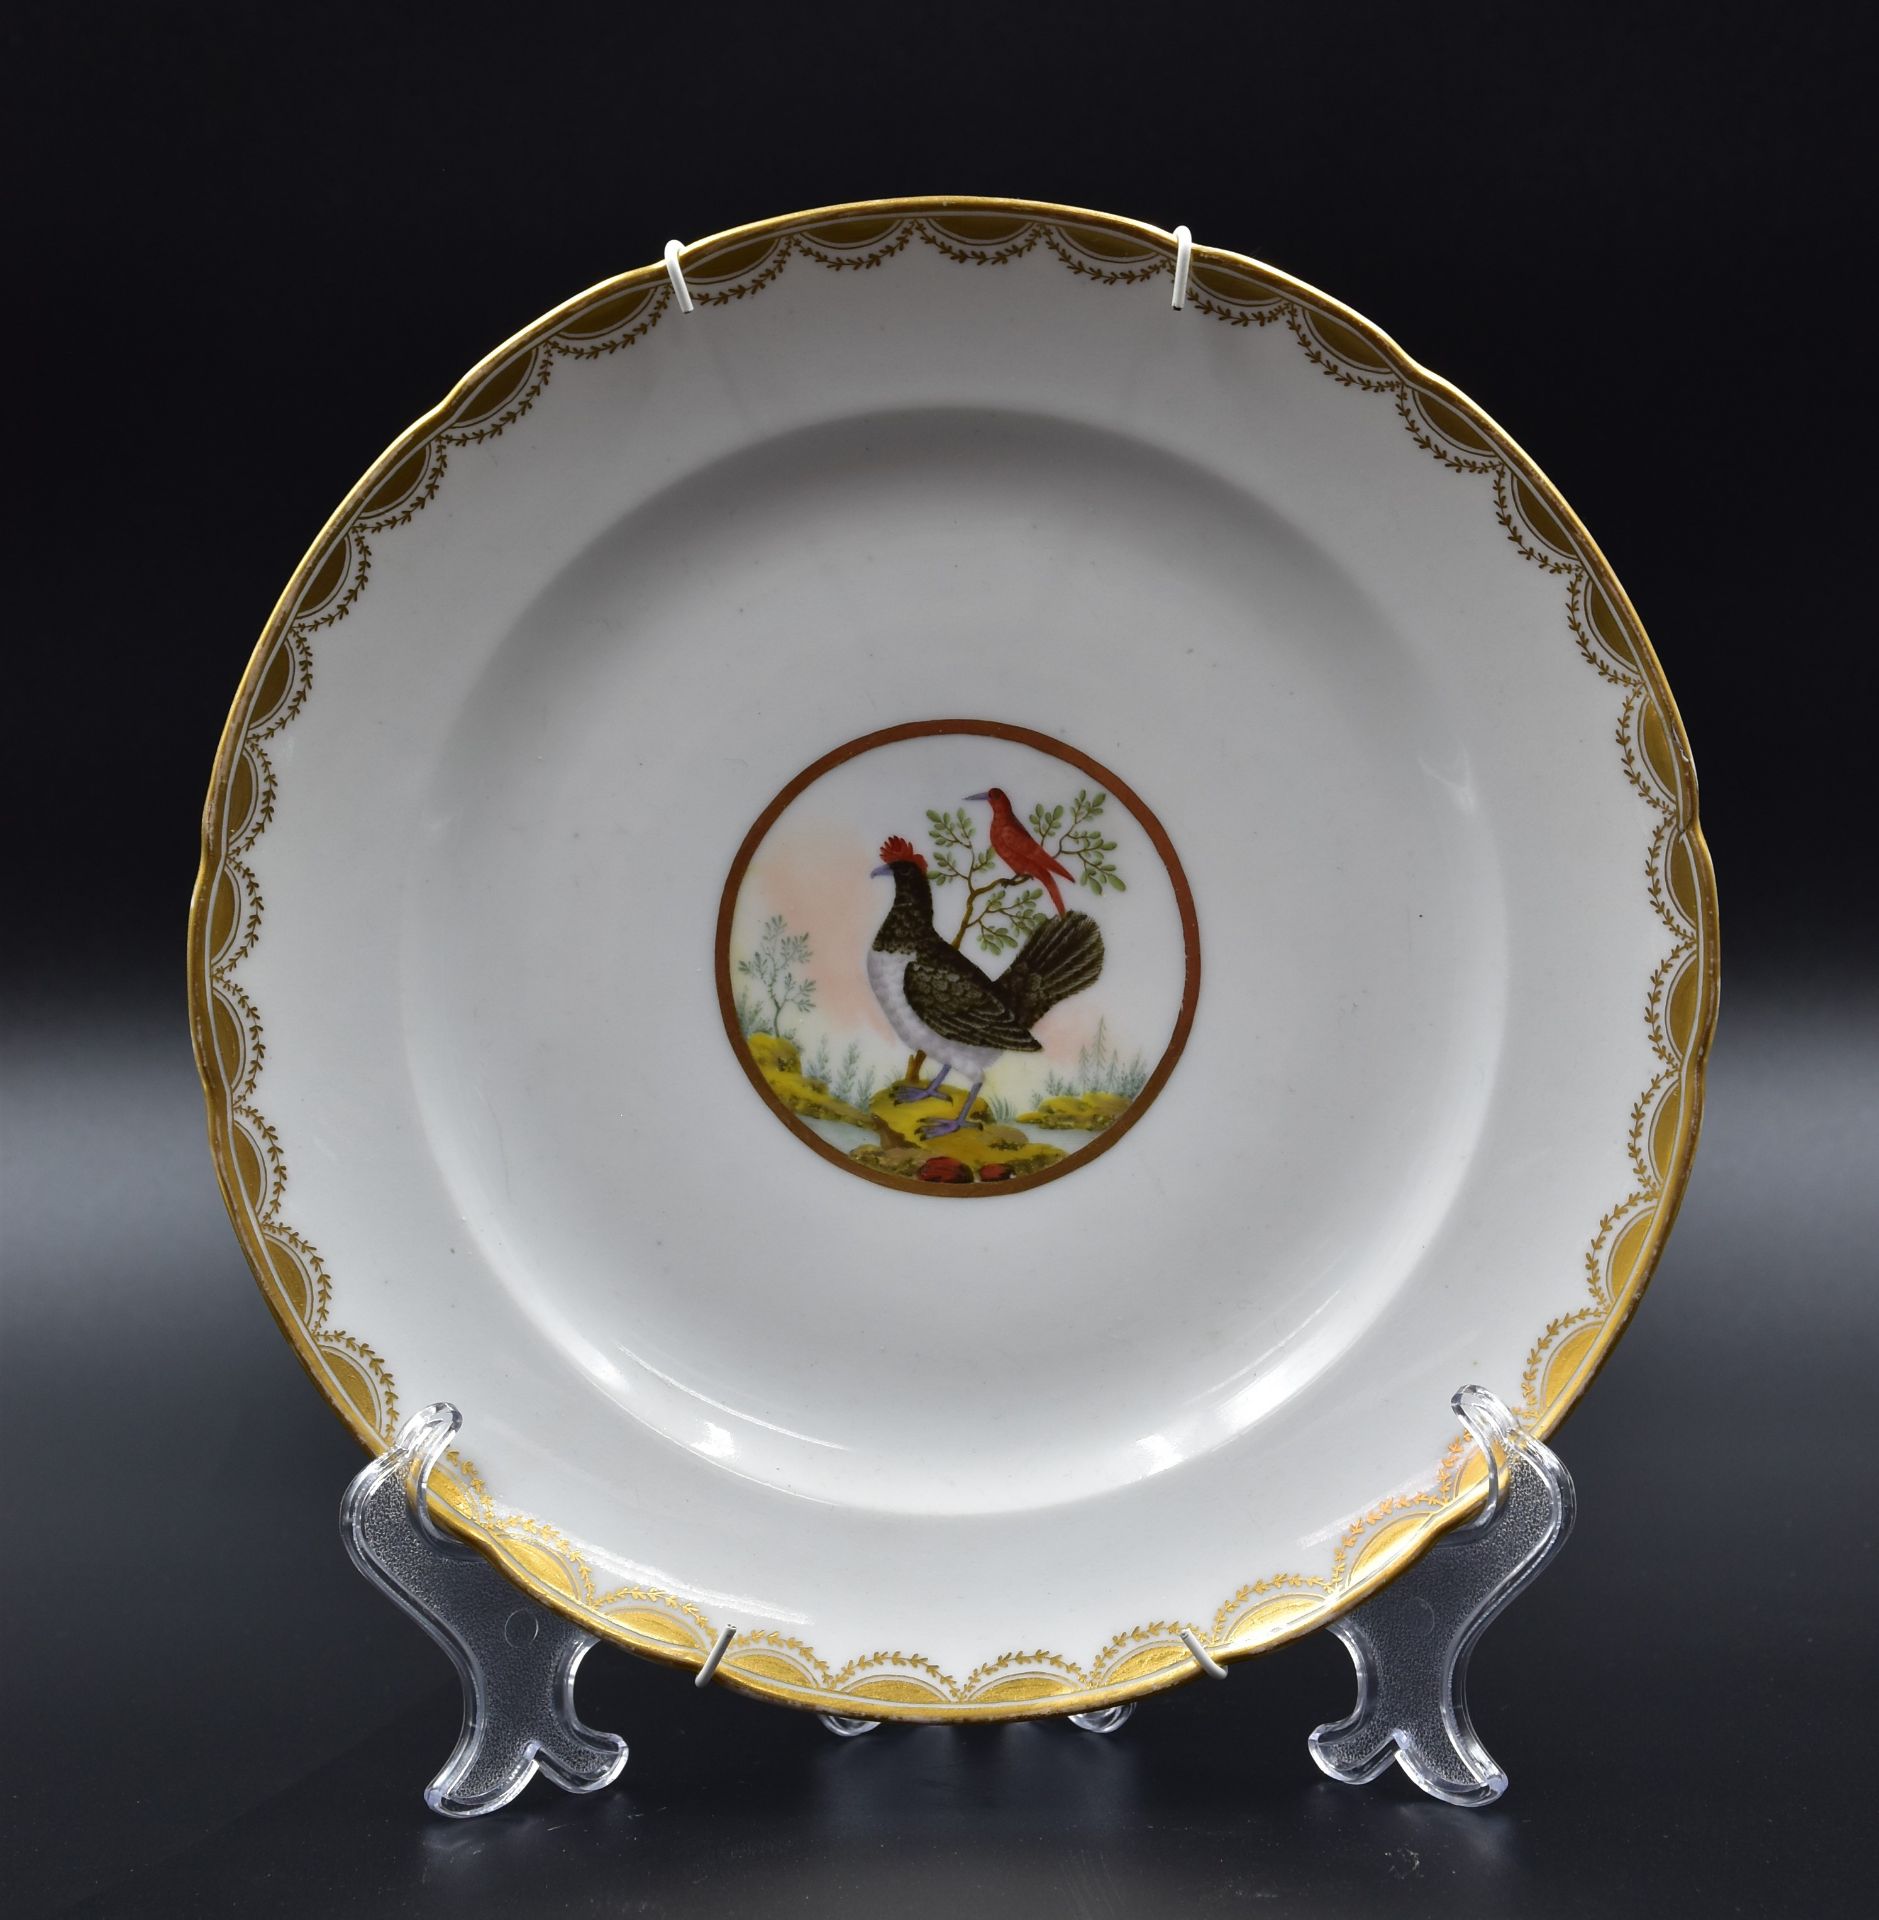 A late 18th century porcelain plate with polychrome decoration of birds.